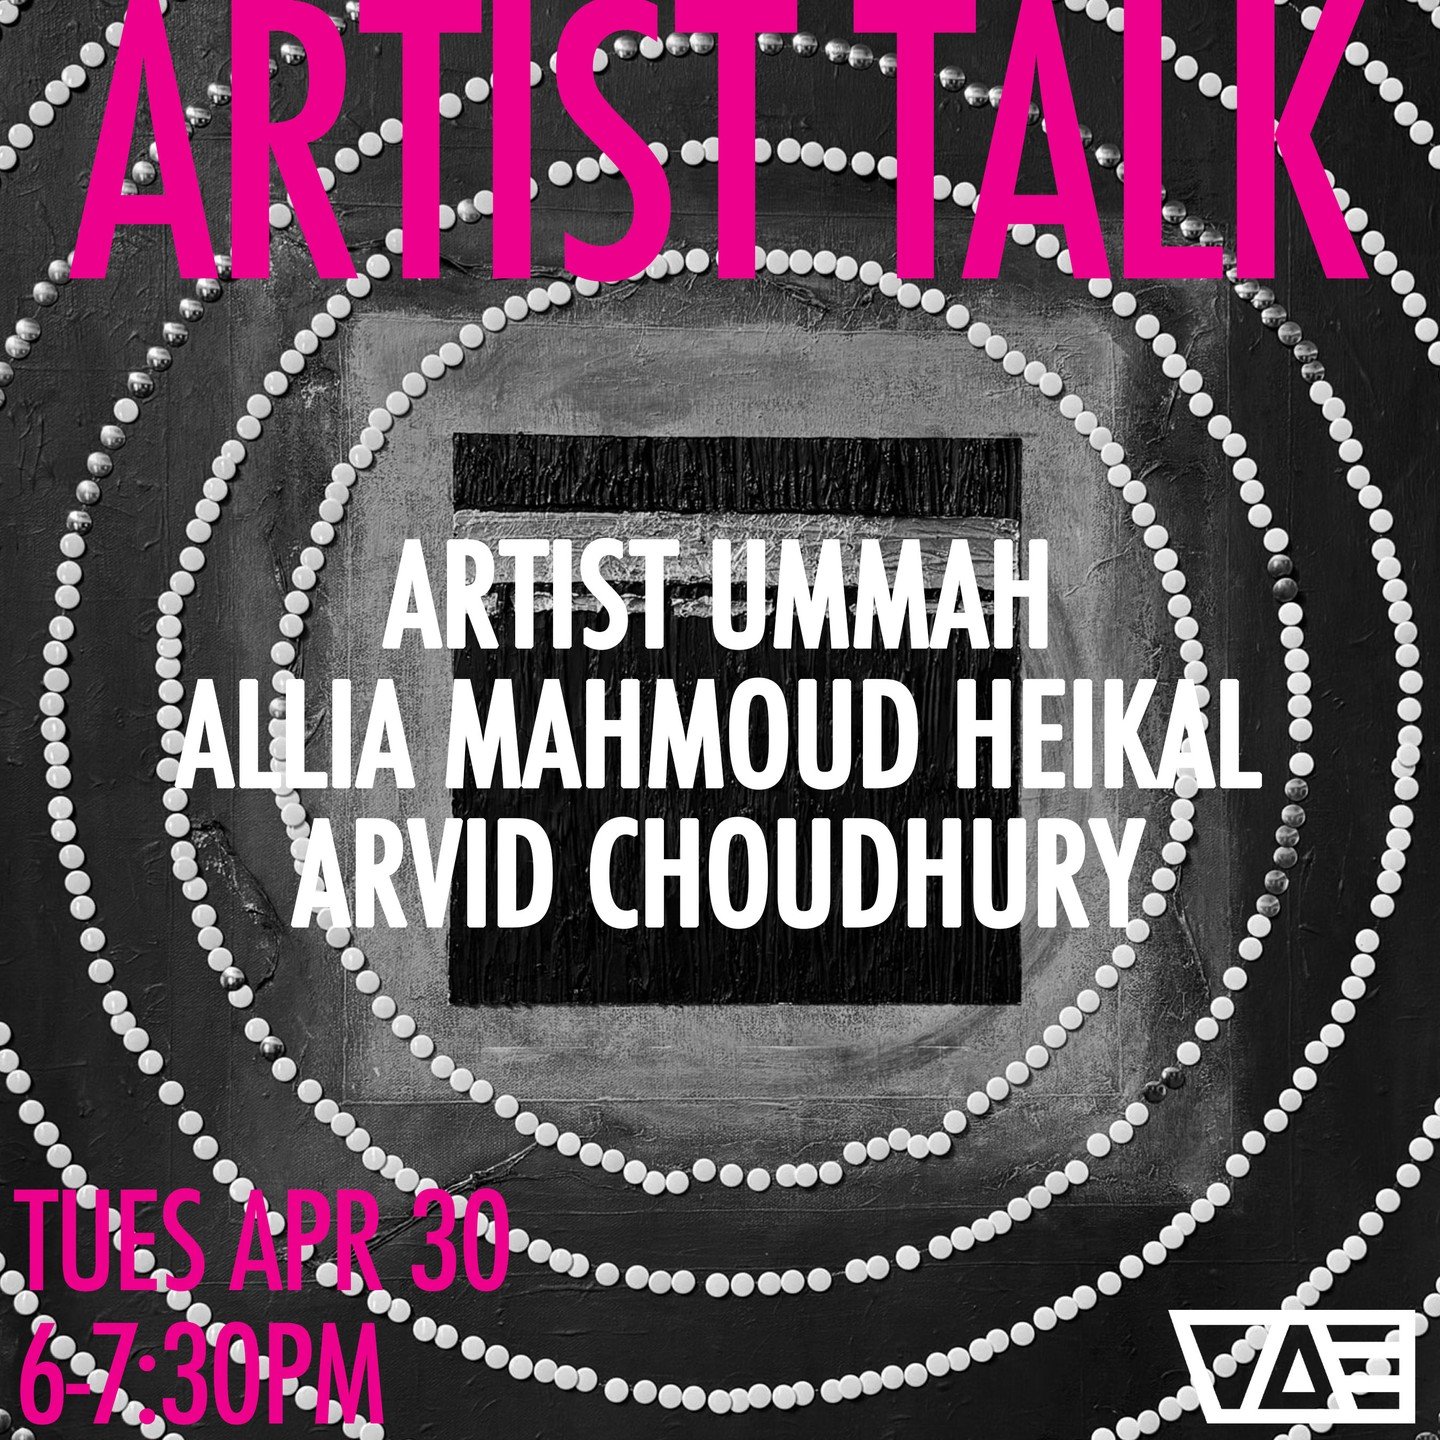 Join us for two exciting artist talks featuring artists from VAE's current exhibition, Contemporary Muslim Art of NC! Each night features a different group of artists from the exhibition who will share information about their practices, processes, an